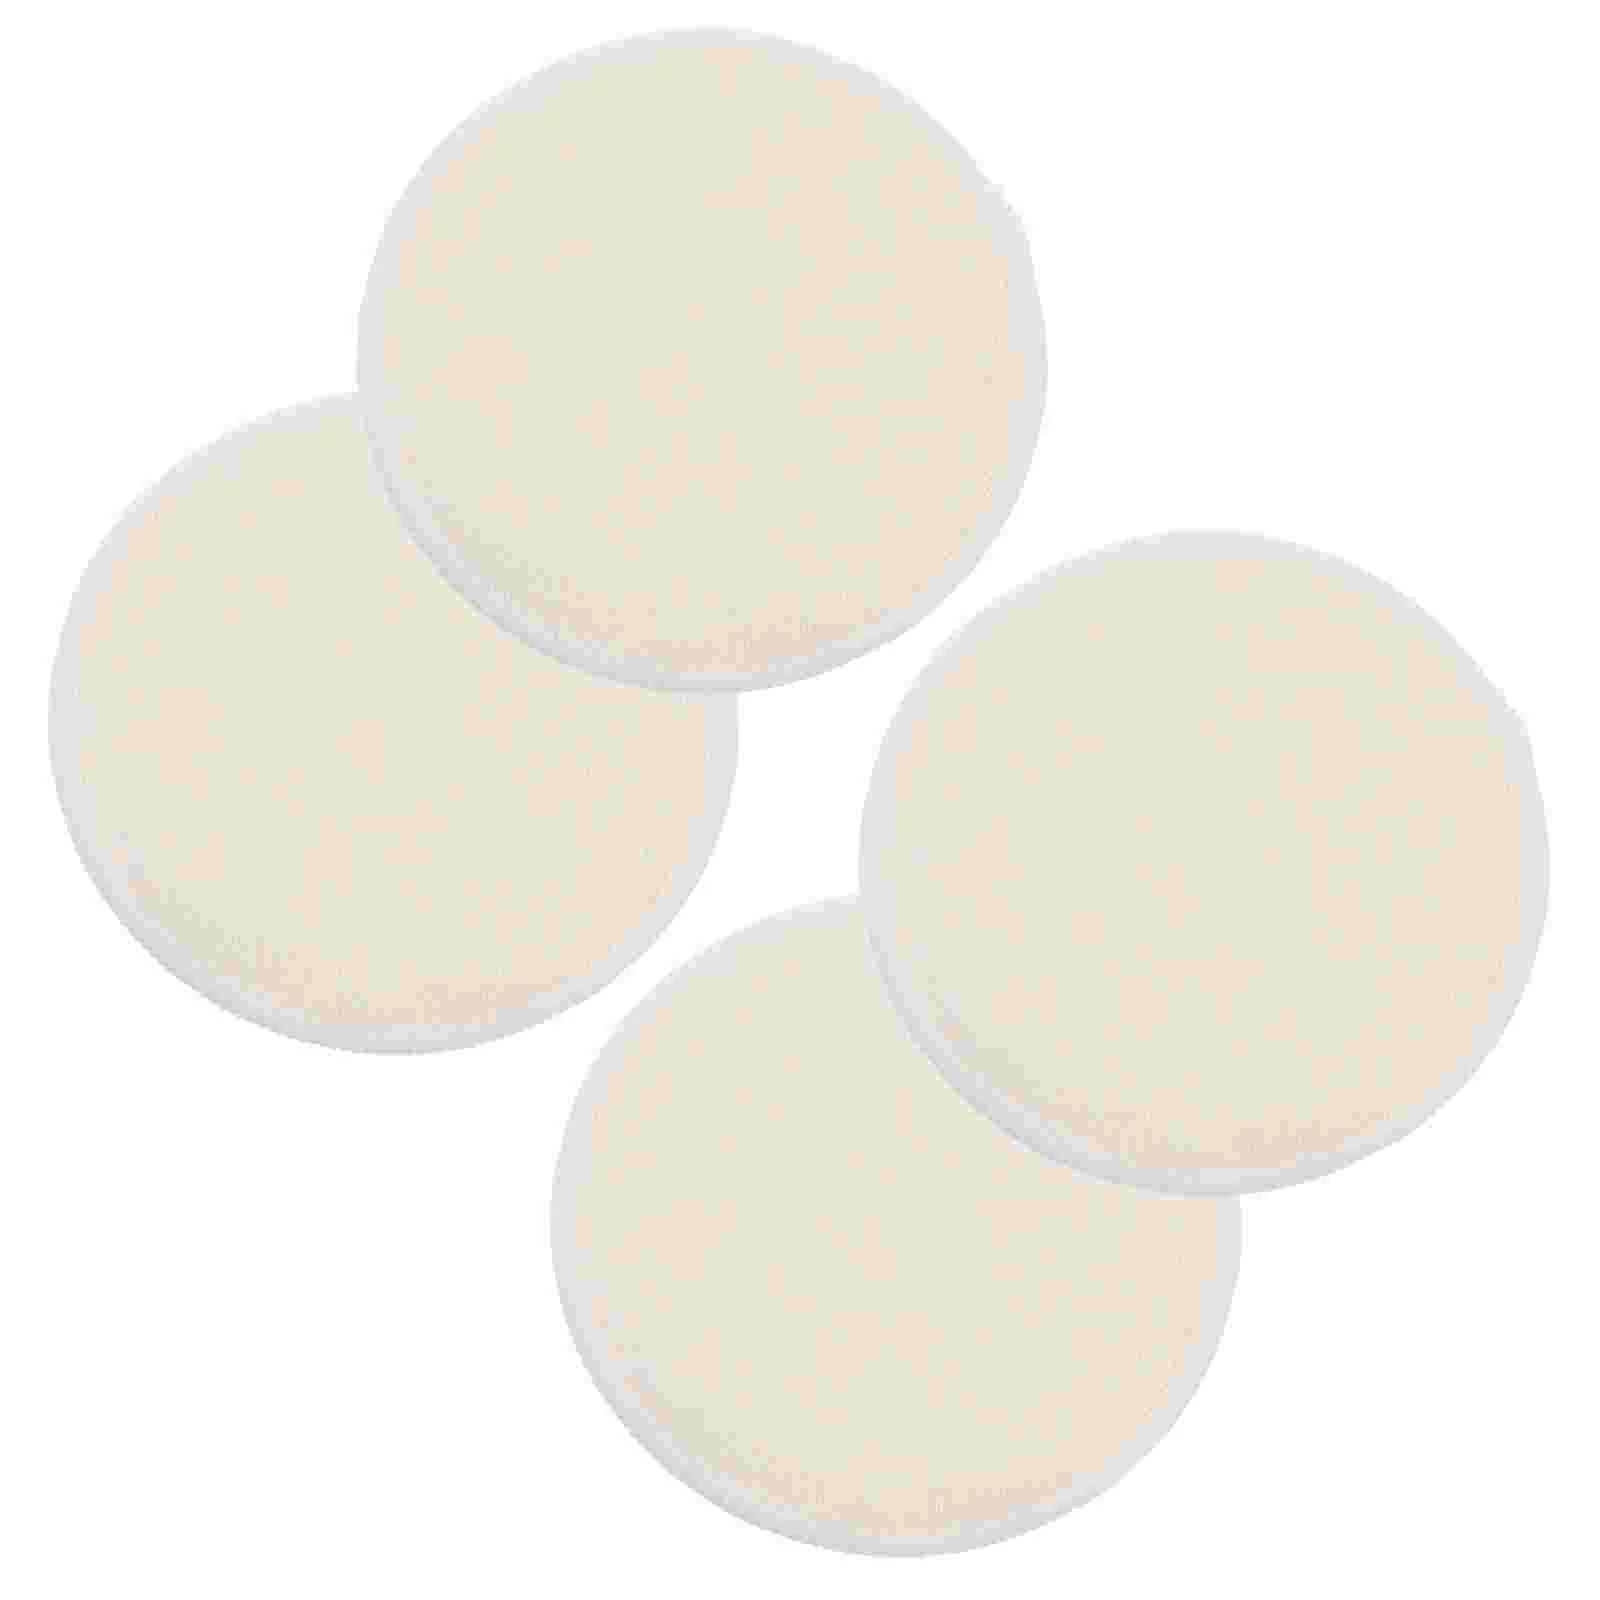 

4Pcs Reusable Nursing Pads Washable Pads Breastfeeding Cushions Comfortable Breast Pads for Breastfeeding